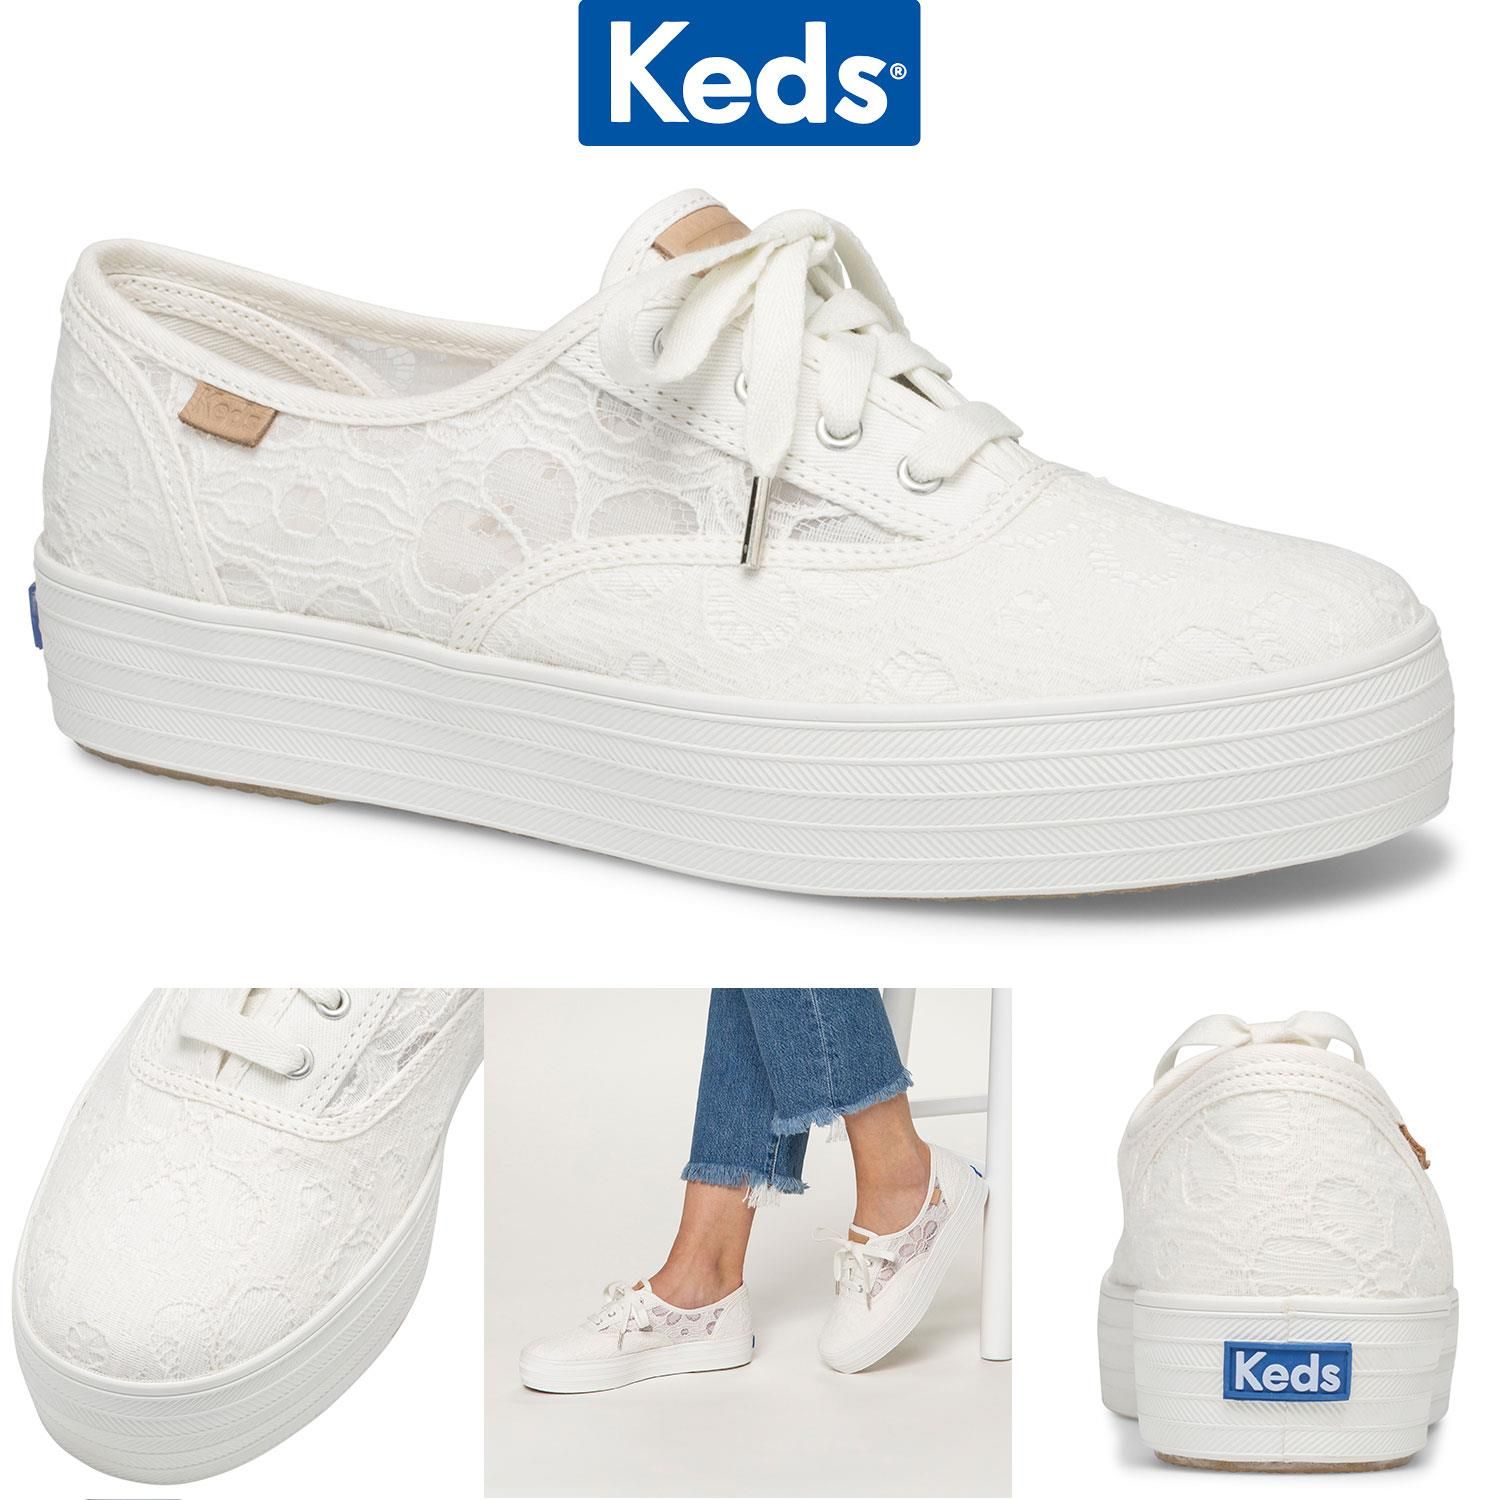 Keds Women's Triple CVO Festival Floral Sneaker with Rubber Outsole

Festival shoes: found. our triple platform sneakers in dainty eyelet are just the thing to add interest (and inches) to all your Coachella-inspired looks - denim cutoffs, crochet wraps, floral kimonos, flower crowns, etc.

Features: 
Textile upper
1